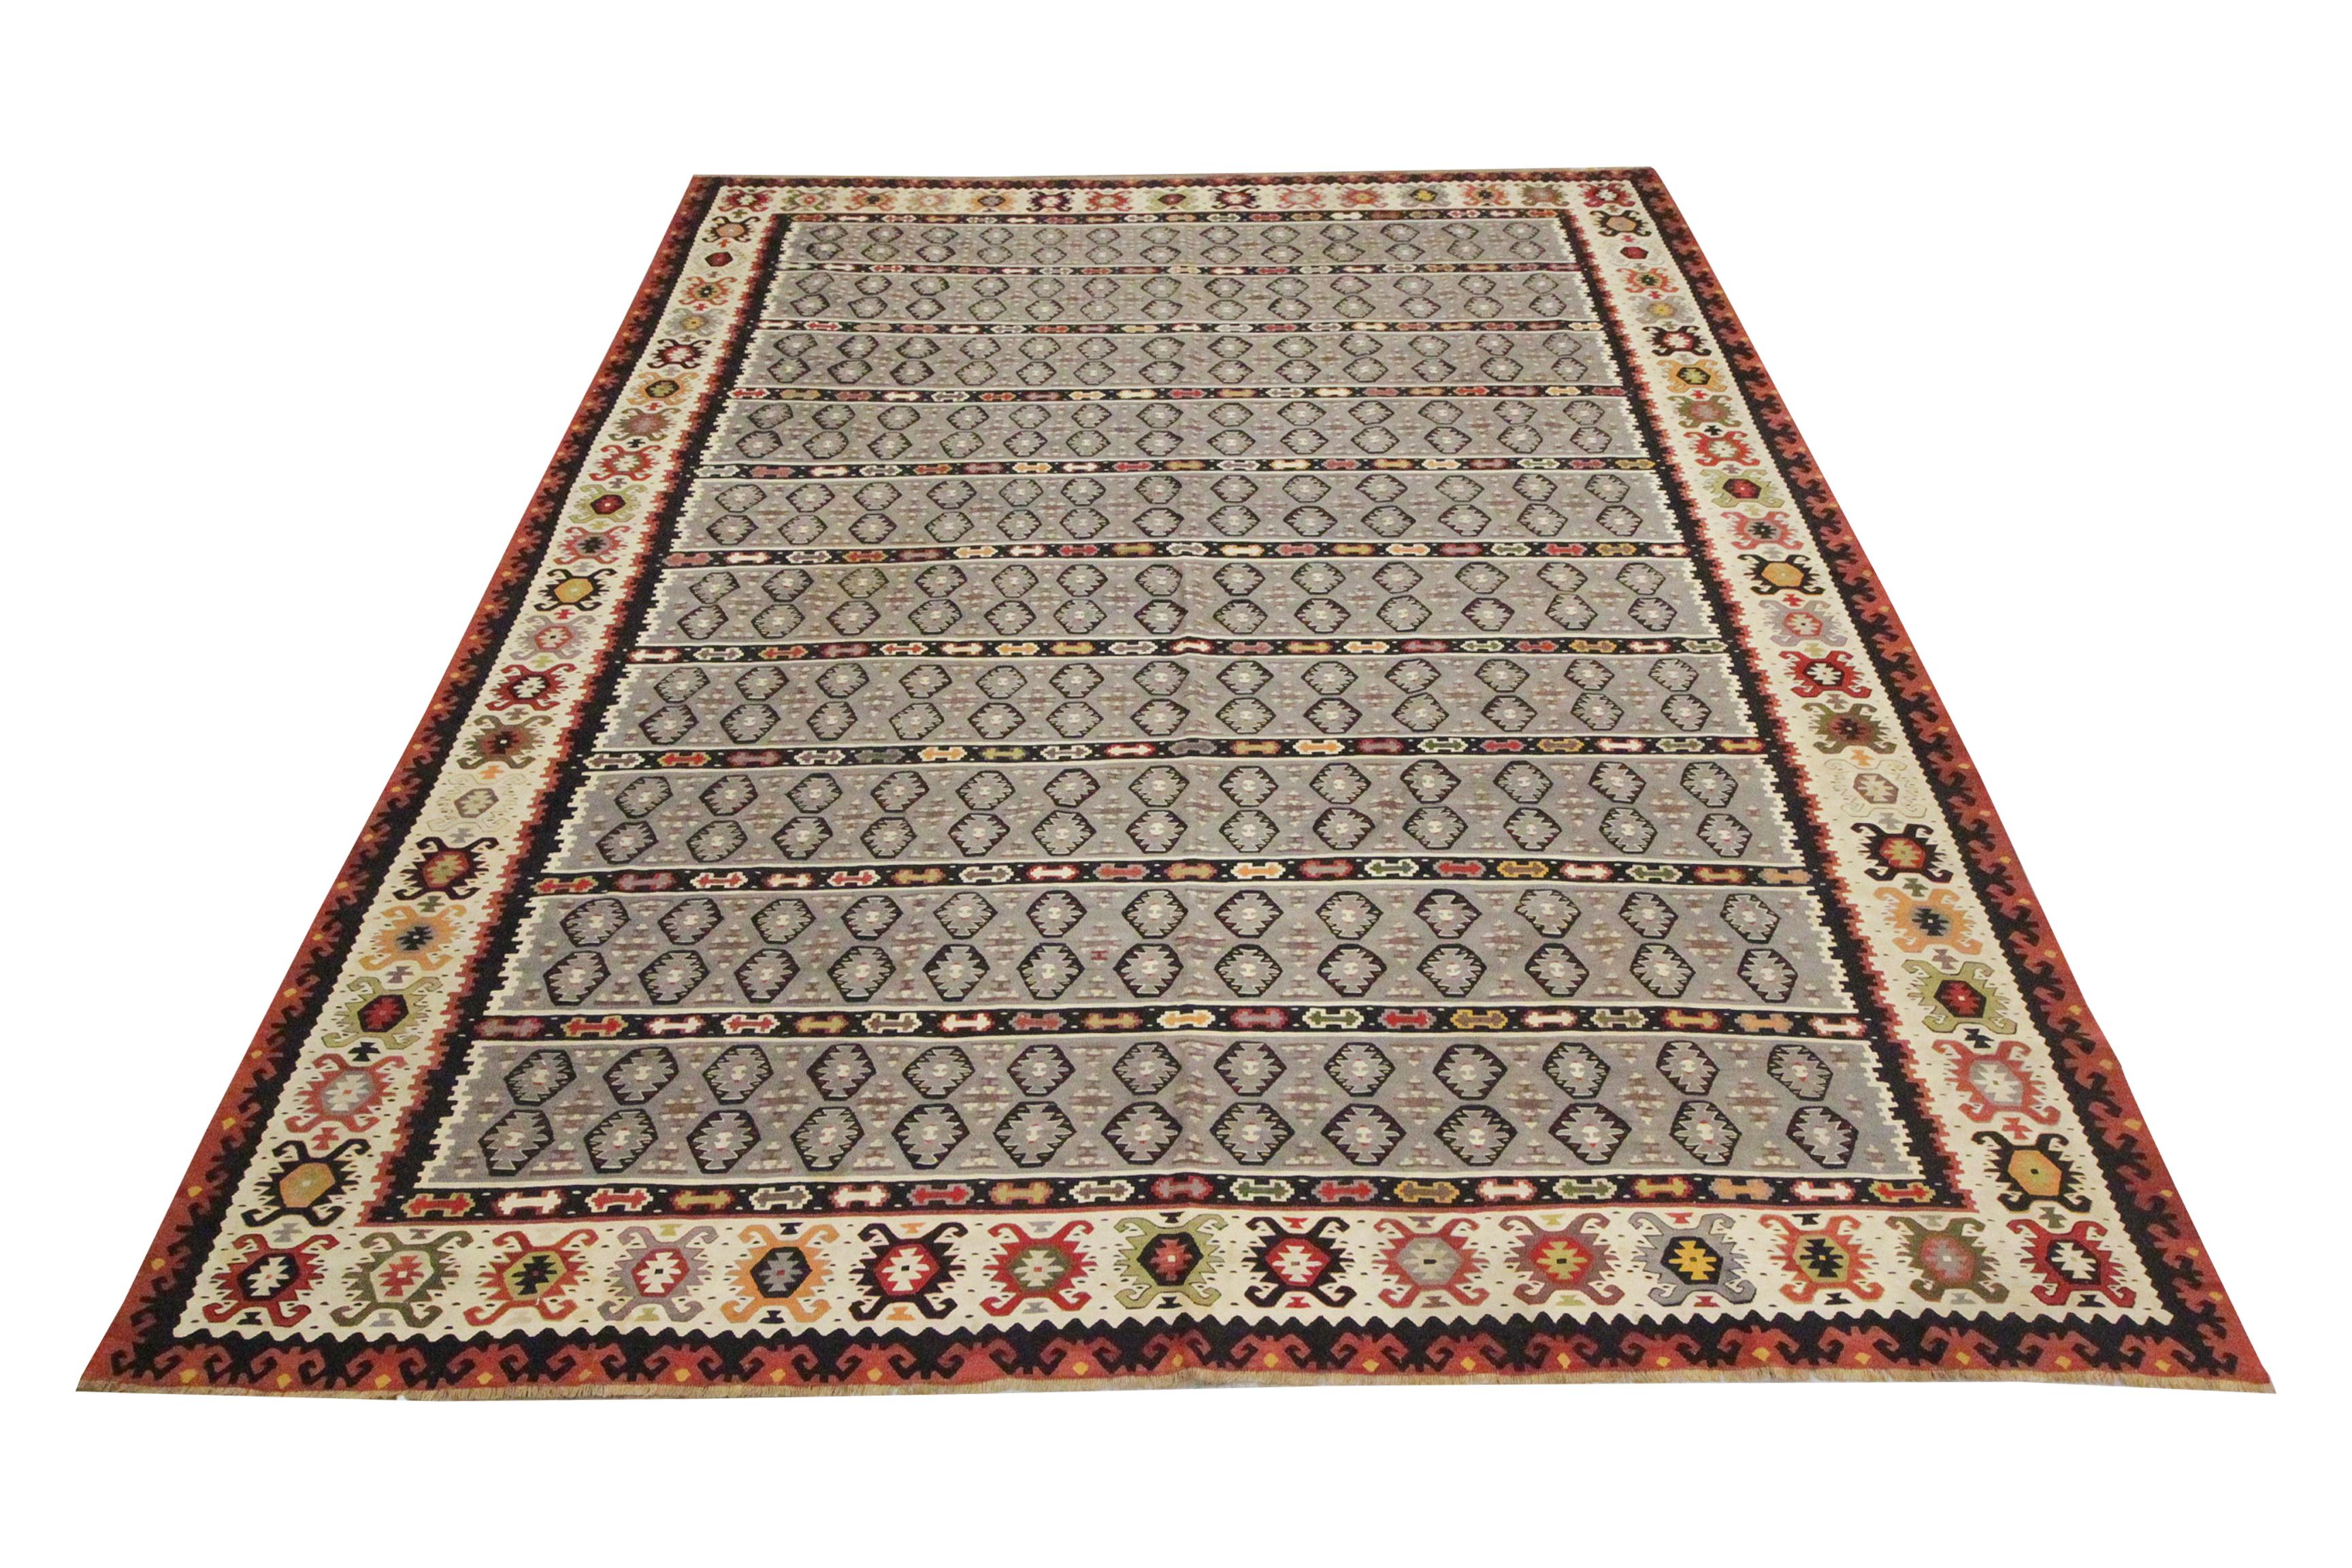 Looking for a new area rug to uplift your space? This bold antique Serbian carpet is sure to do just that. Grey, cream and rust accents make up the main colours in this elegant blue wool rug. The striped rug is woven with a grand repeating central